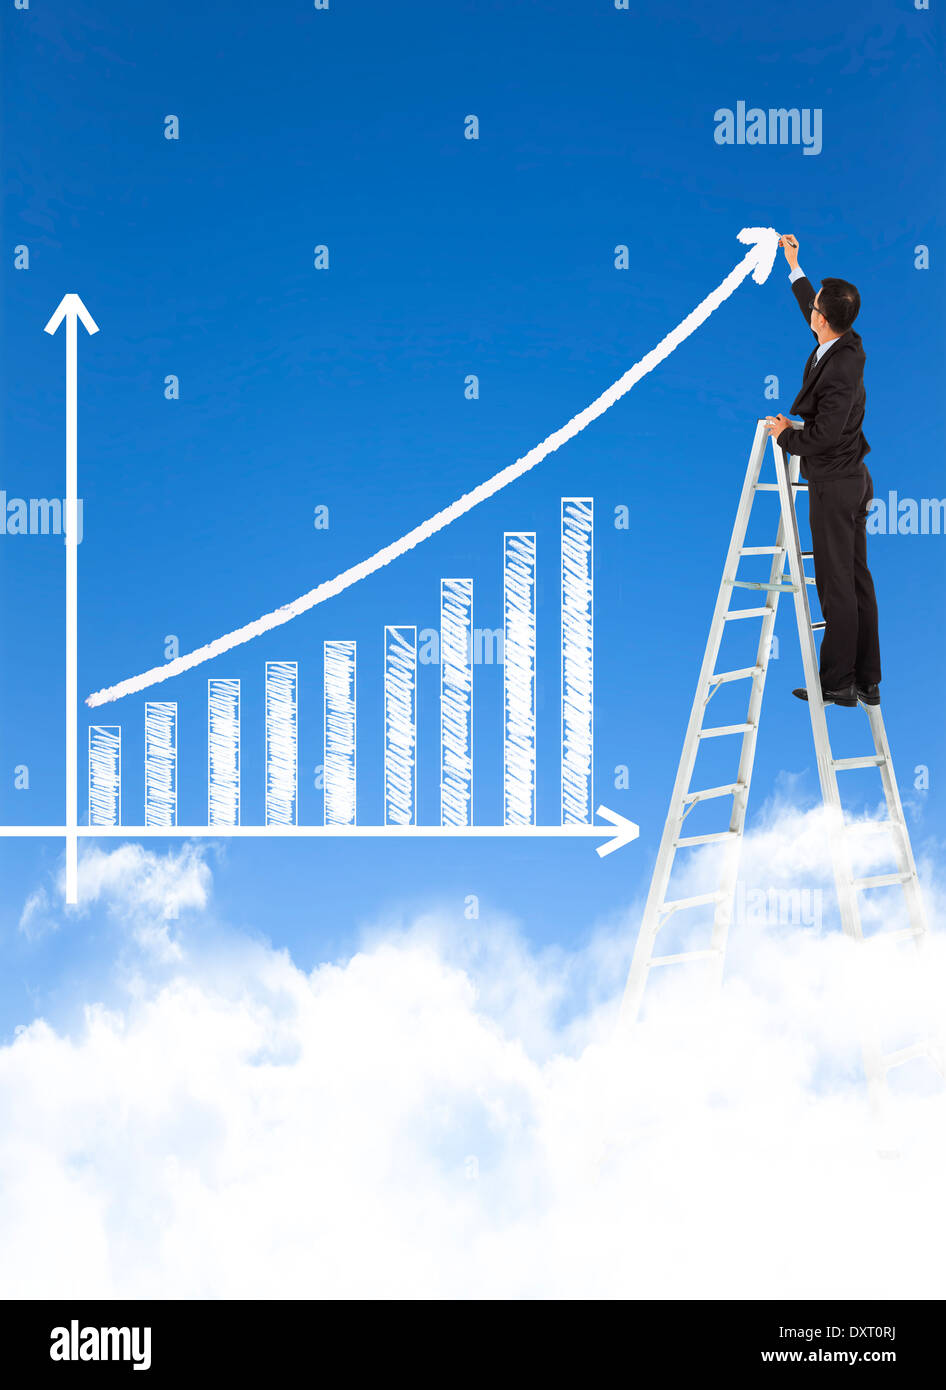 business man writing growth bar chart with sky background Stock Photo